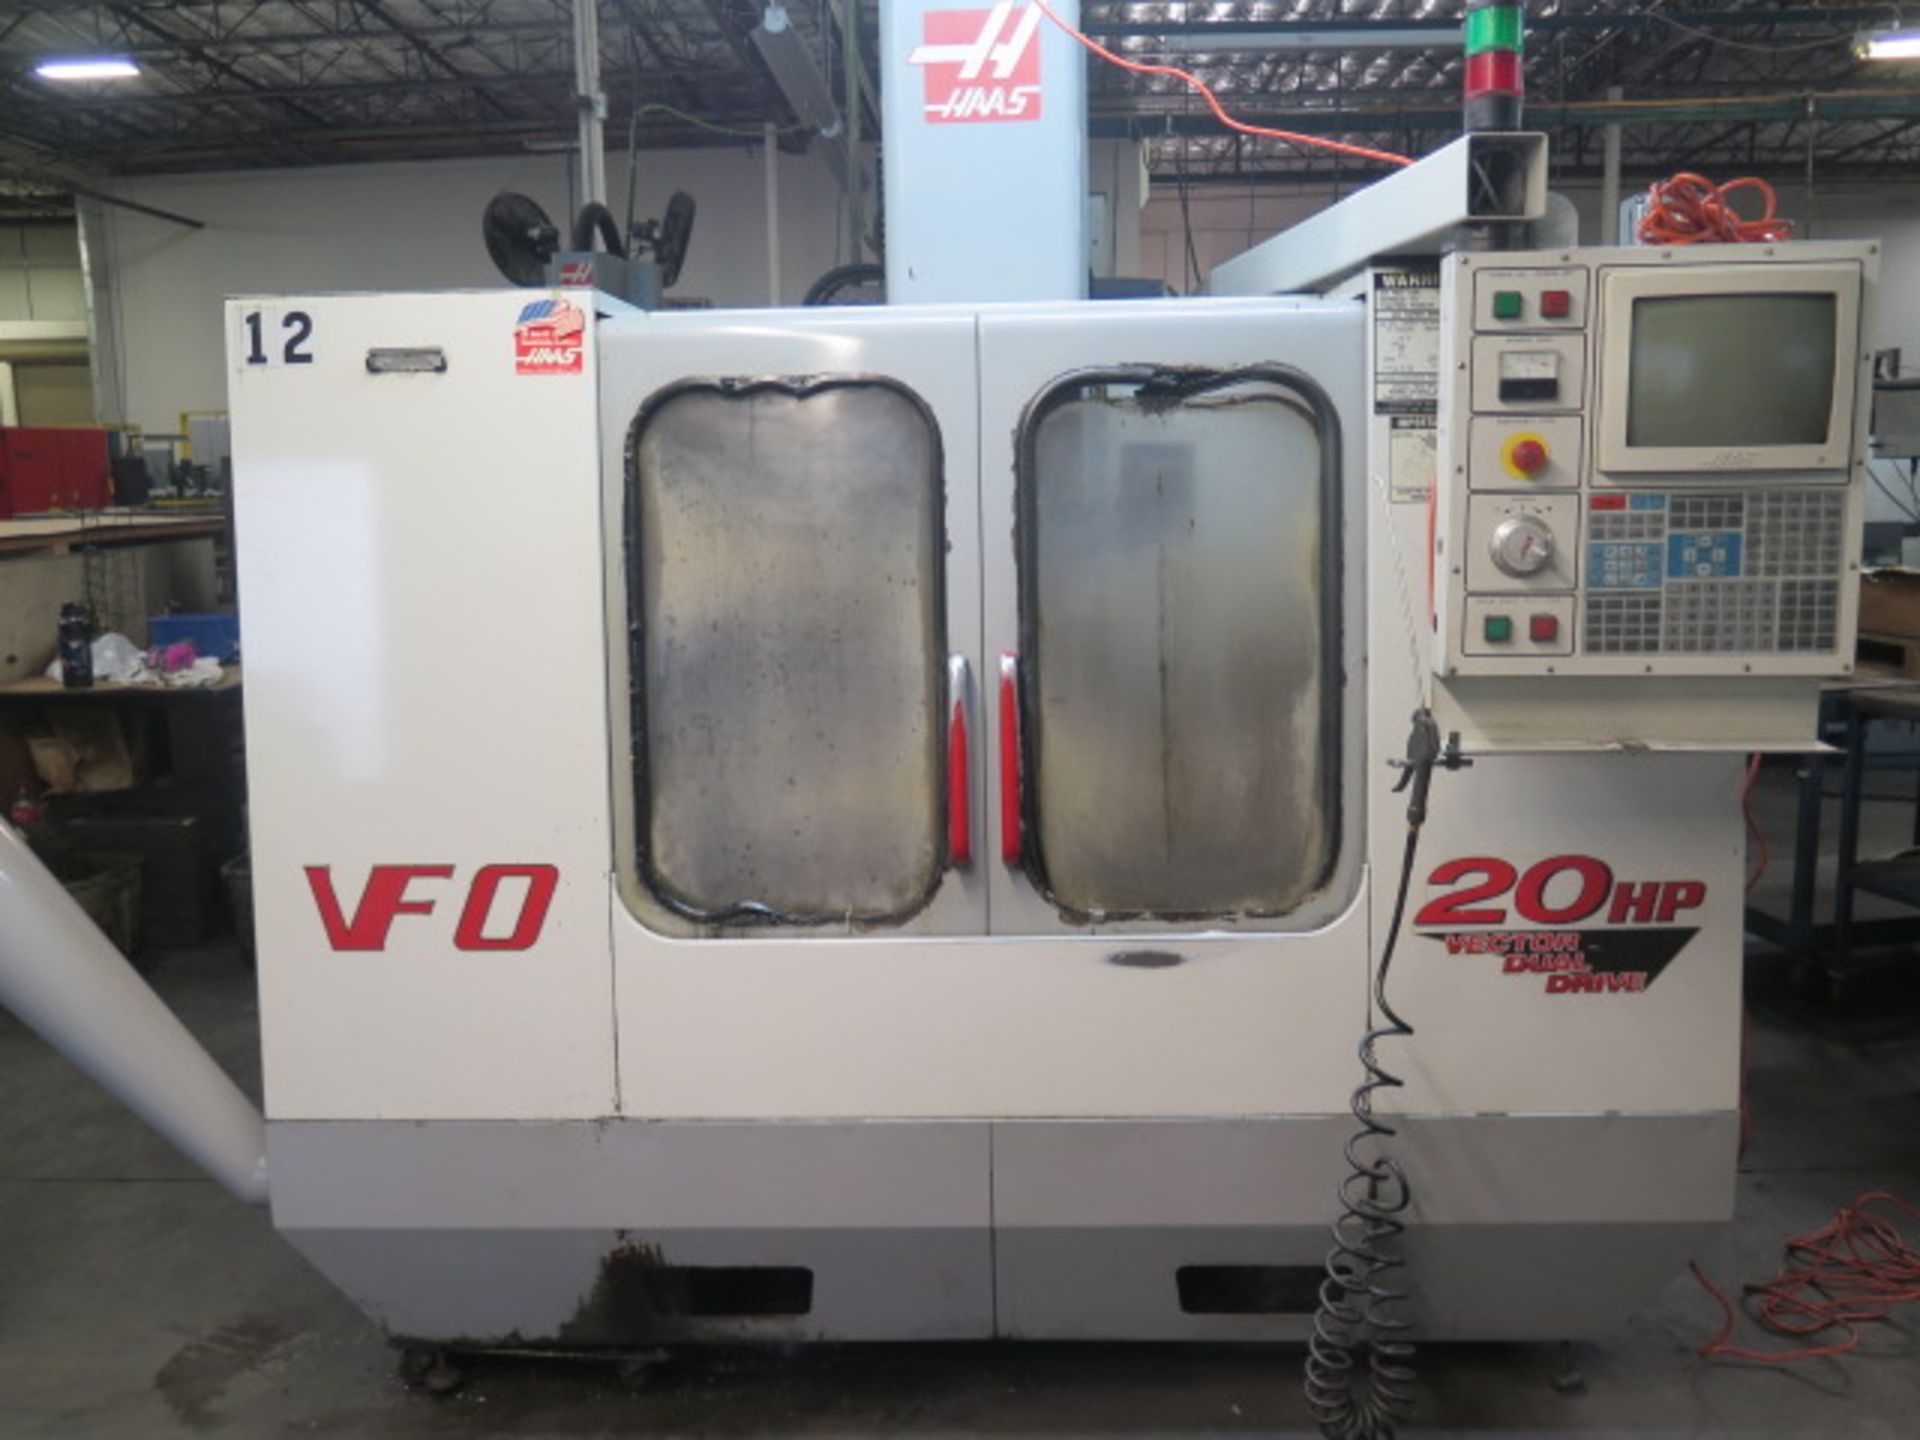 1999 Haas VF-0 CNC Vertical Machining Center s/n 18534 w/ Haas Controls, 20-Station ATC, CAT-40